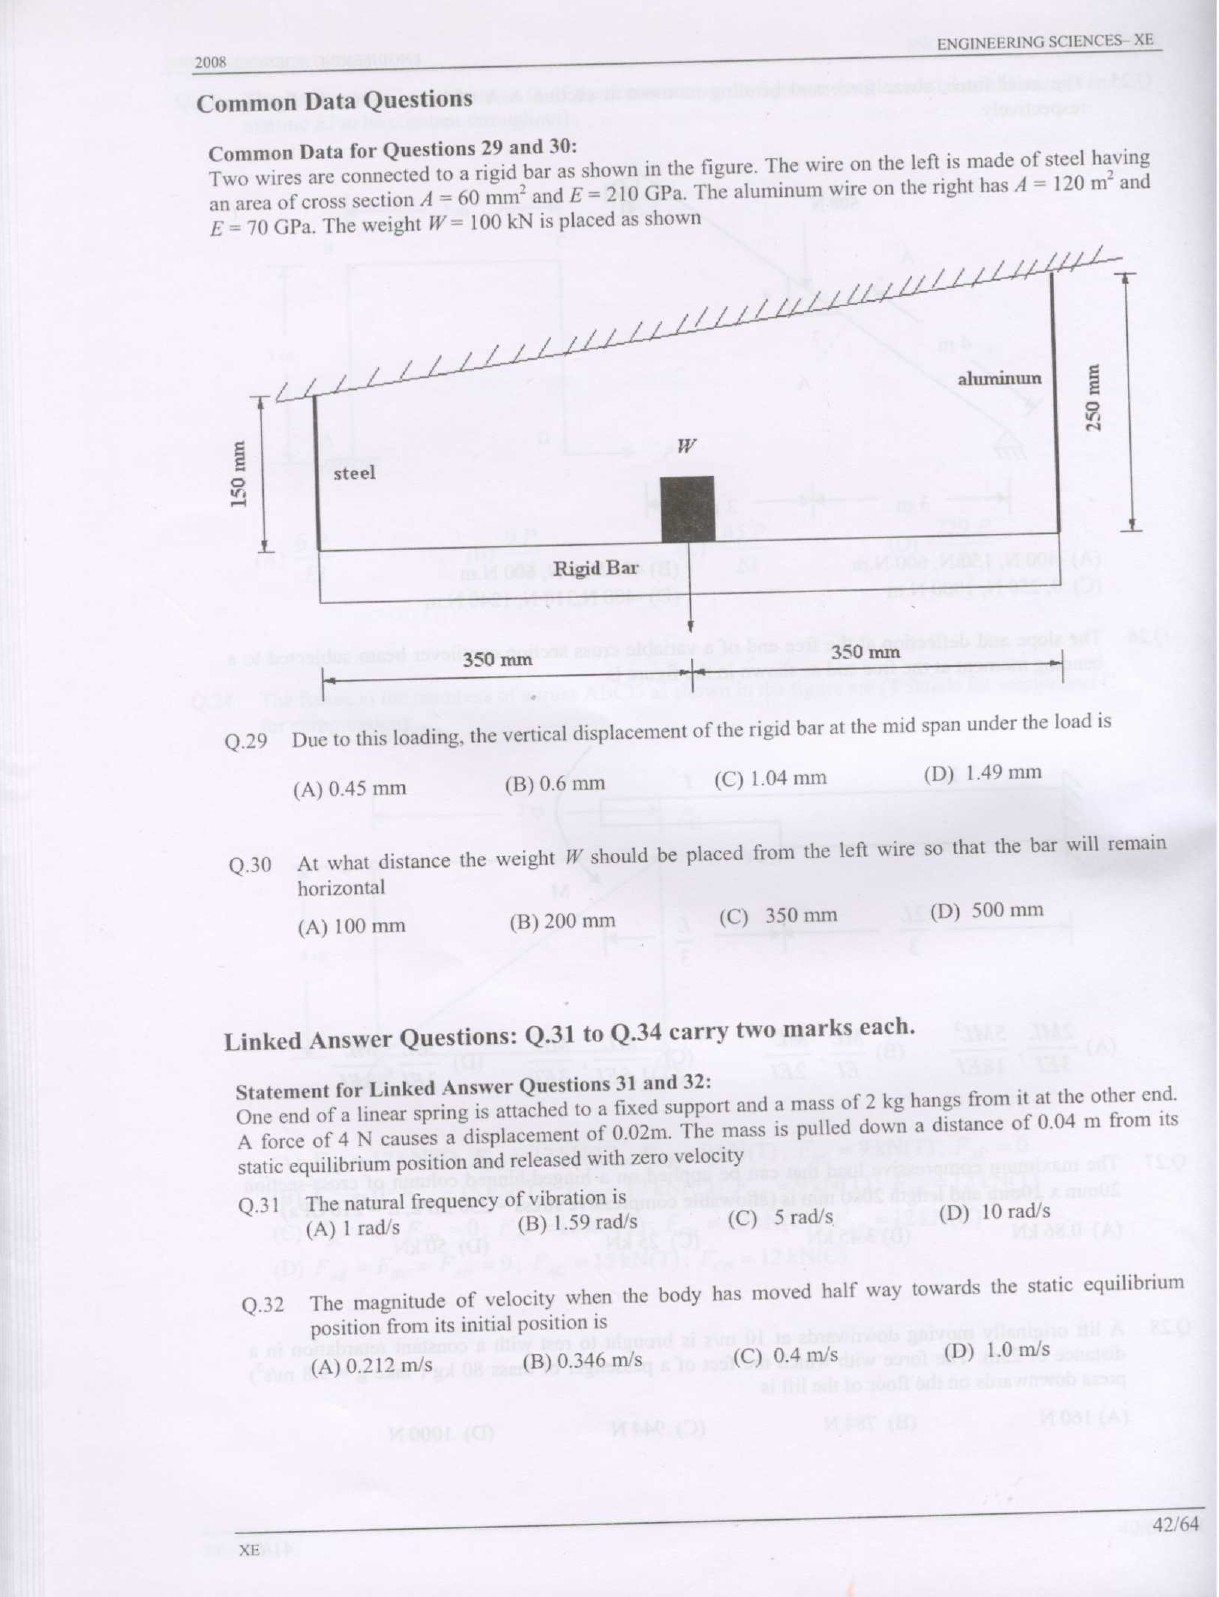 GATE Exam Question Paper 2008 Engineering Sciences 42